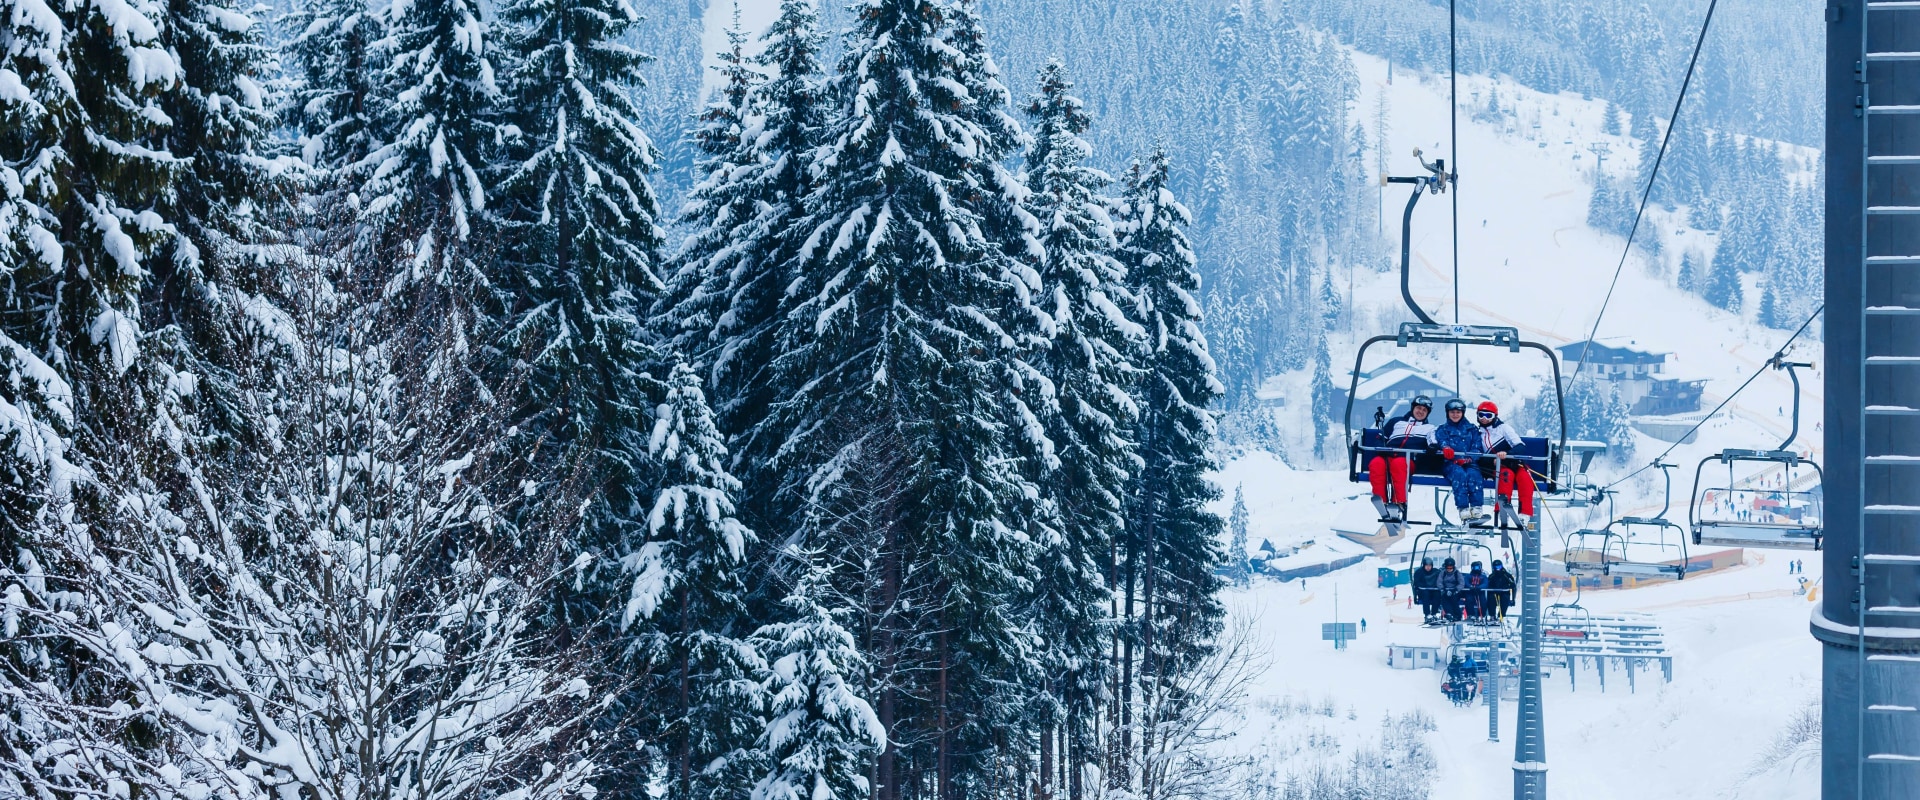 The Ultimate Guide to Ski Vacations: Top Destinations, Affordable Options, and More